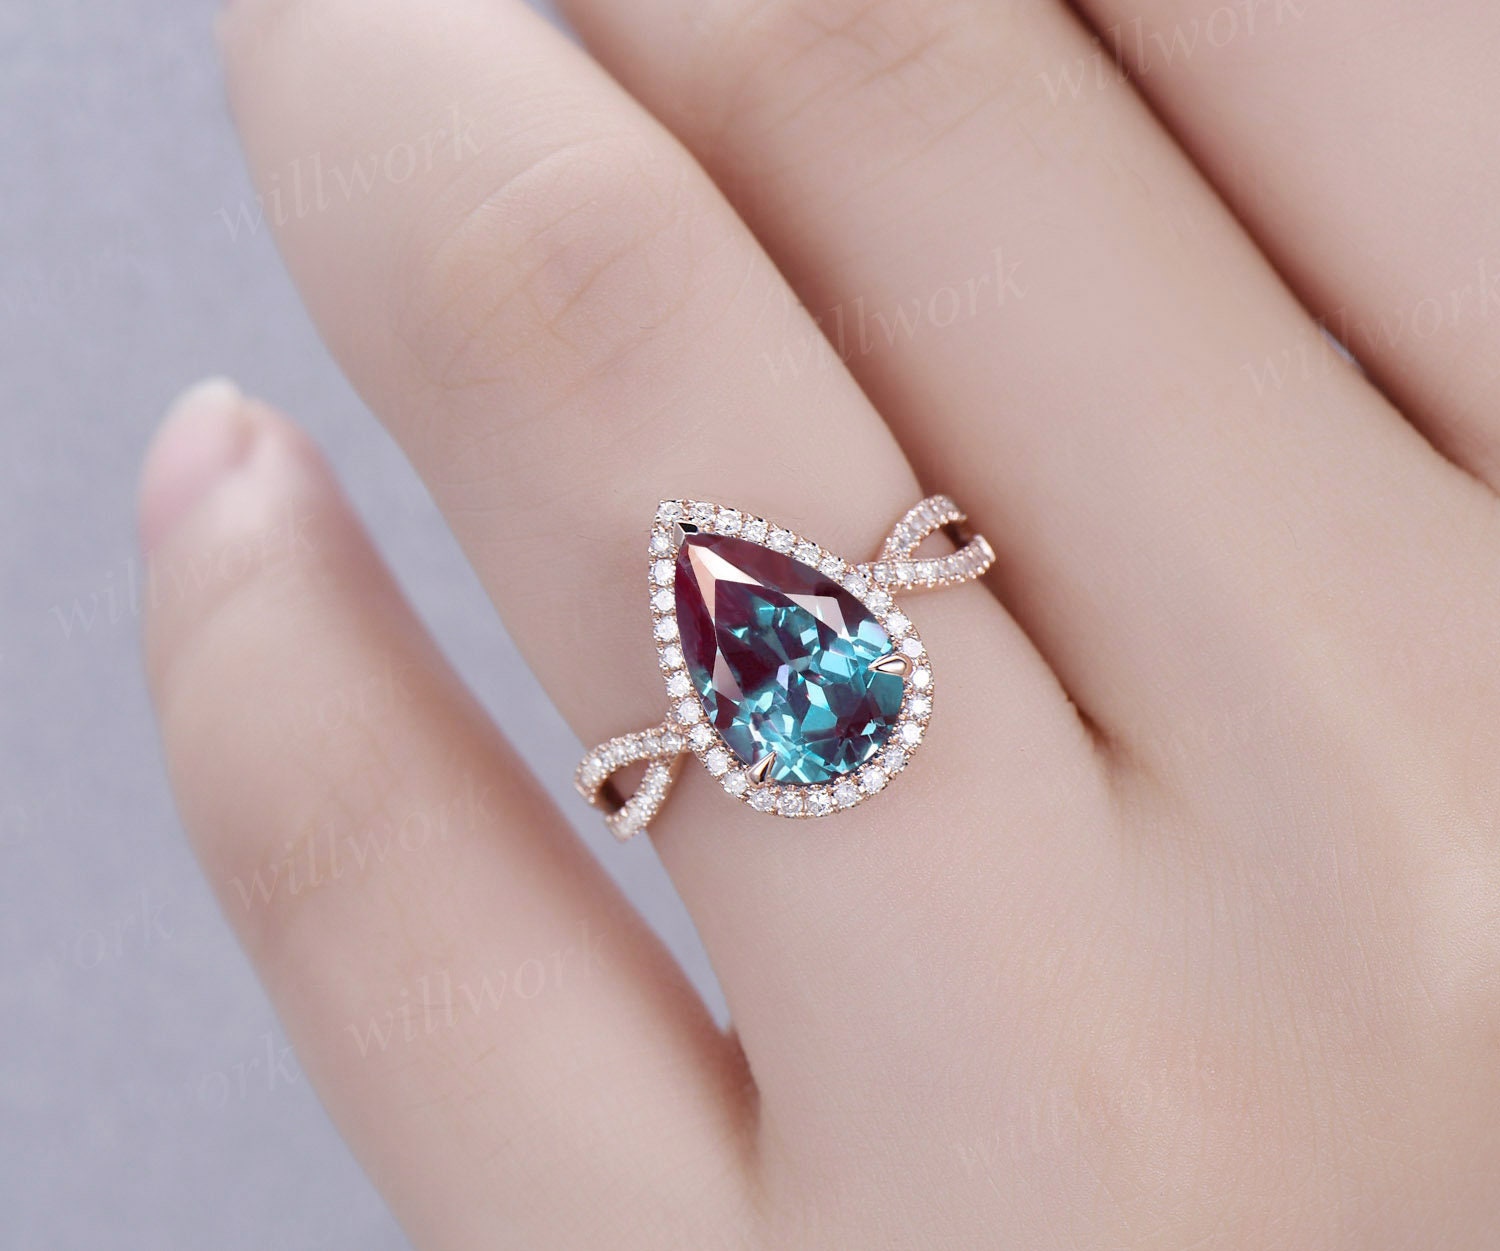 8x12mm pear shaped Alexandrite engagement ring vintage infinity diamond ring color change stone ring for women dainty jewelry bridal gift